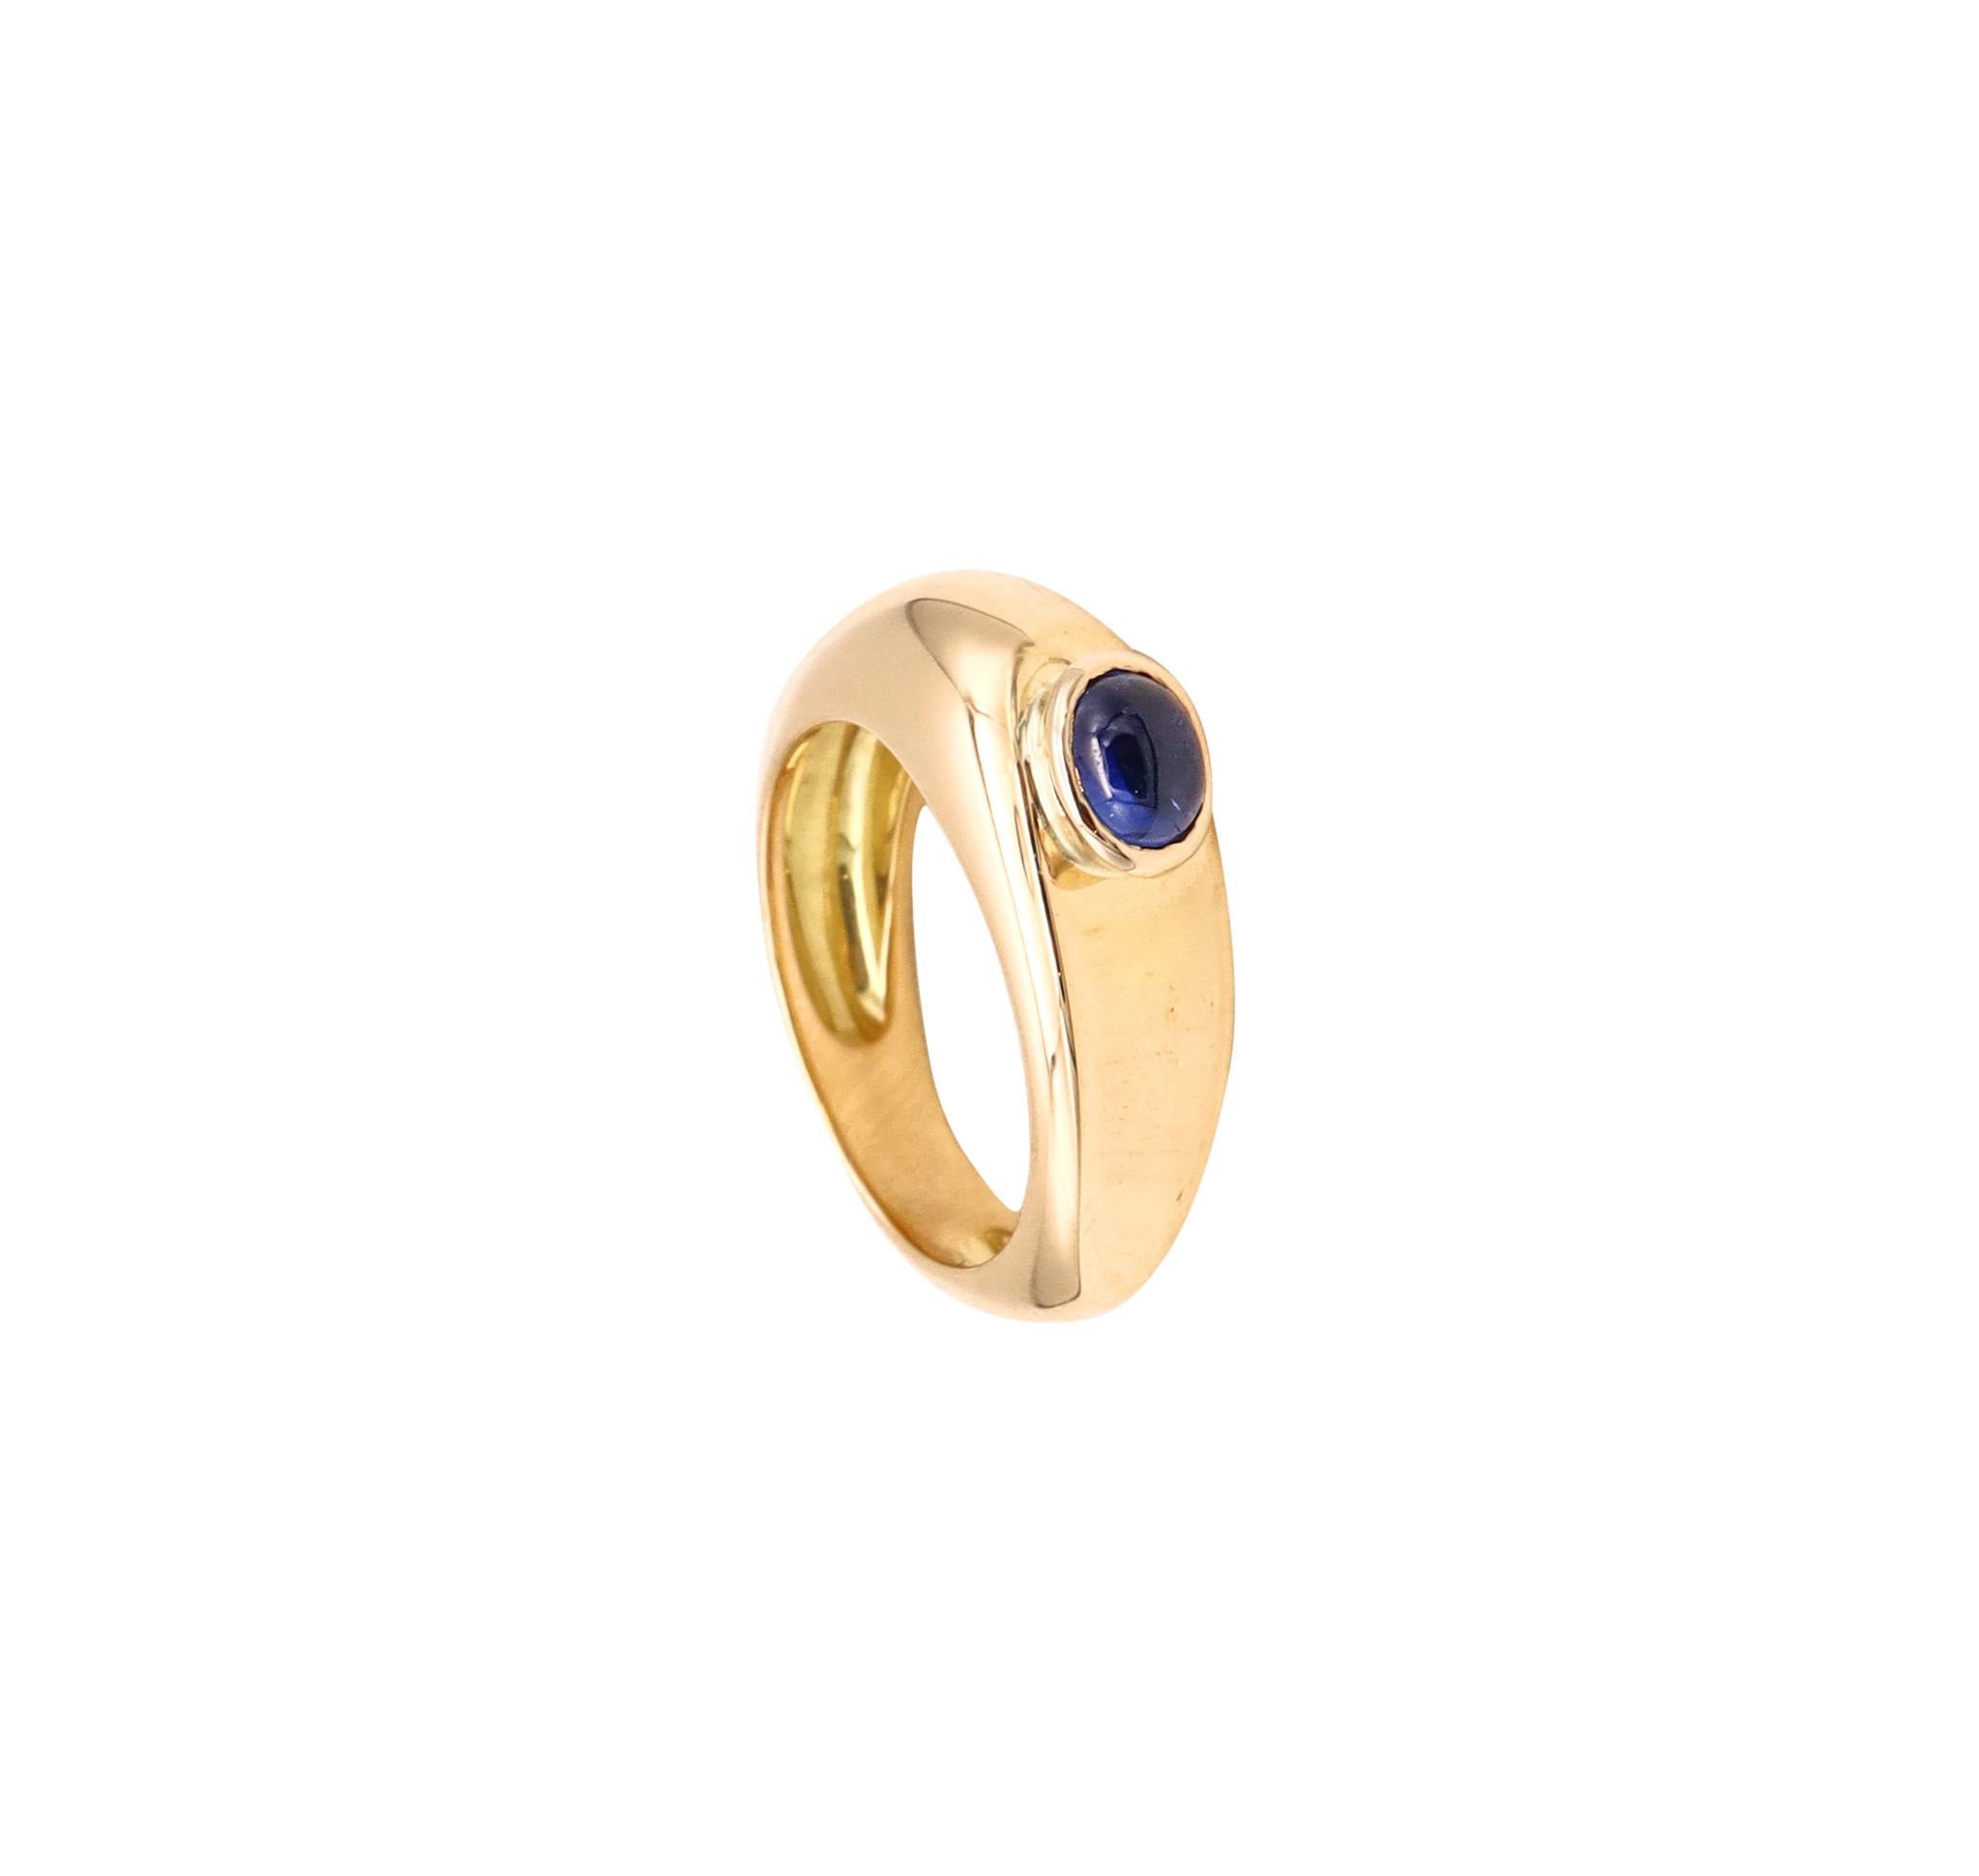 A ring with a sapphire designed by Fred.

Beautiful geometric piece created in Paris, France by the house of Fred, circa 1980's. It was crafted in solid yellow gold of 18 karat, with high polished finish.

Bezel set on top, with an oval cabochon cut